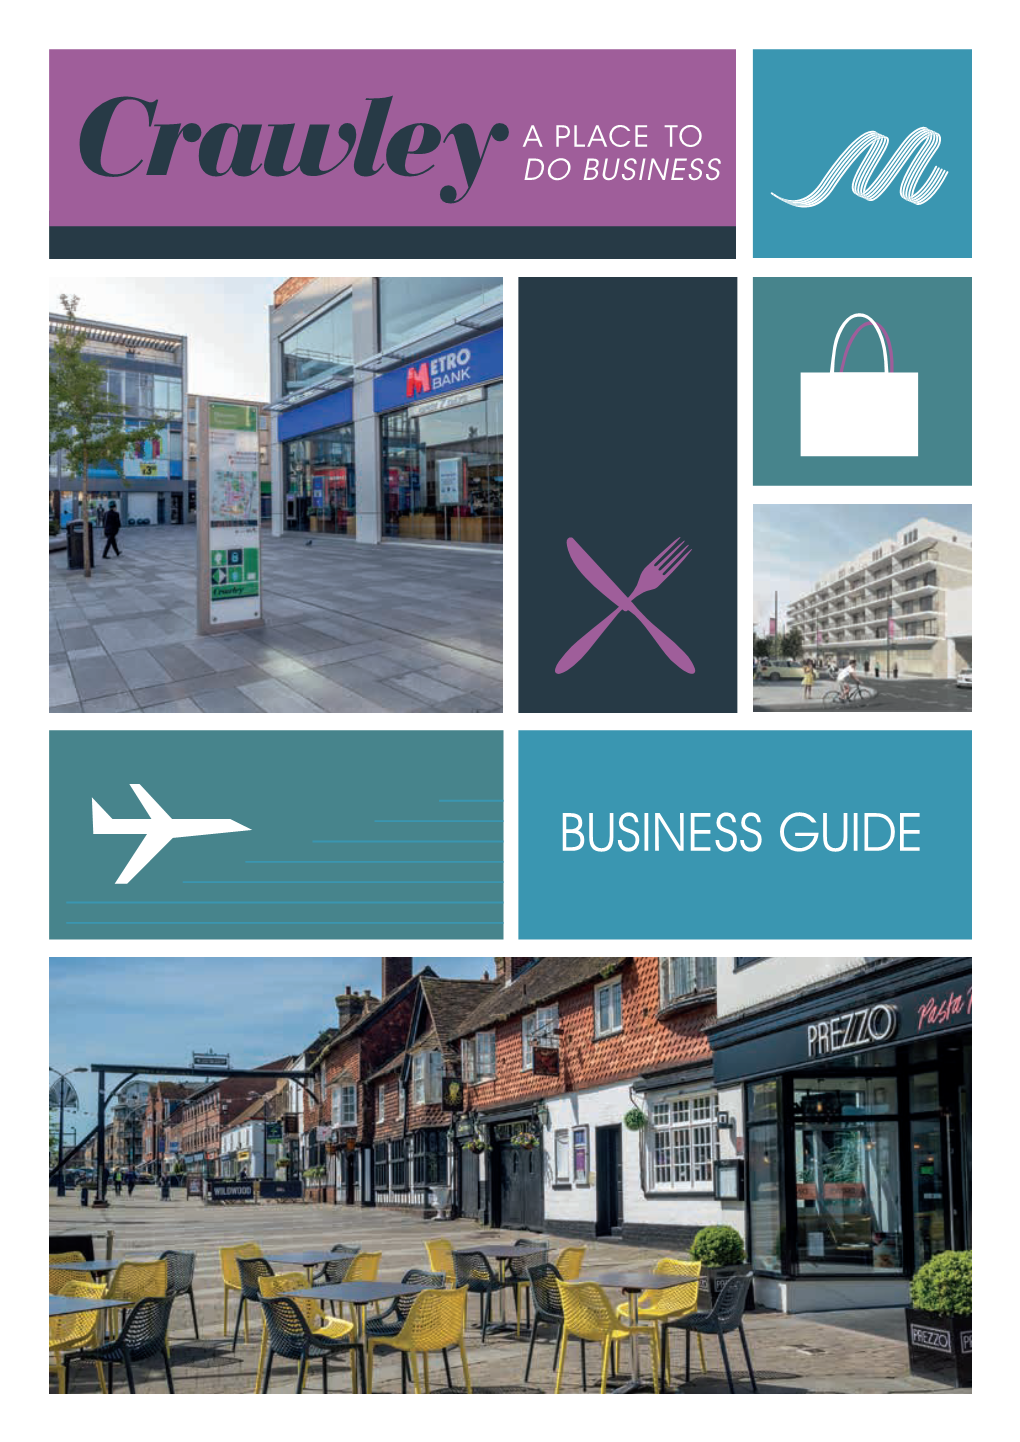 BUSINESS GUIDE 30.07.19 260Mm Preferred Early Page 2019112 1St 180Mm Illustrator CC Crawley BG 19 AP Full Colour Yes